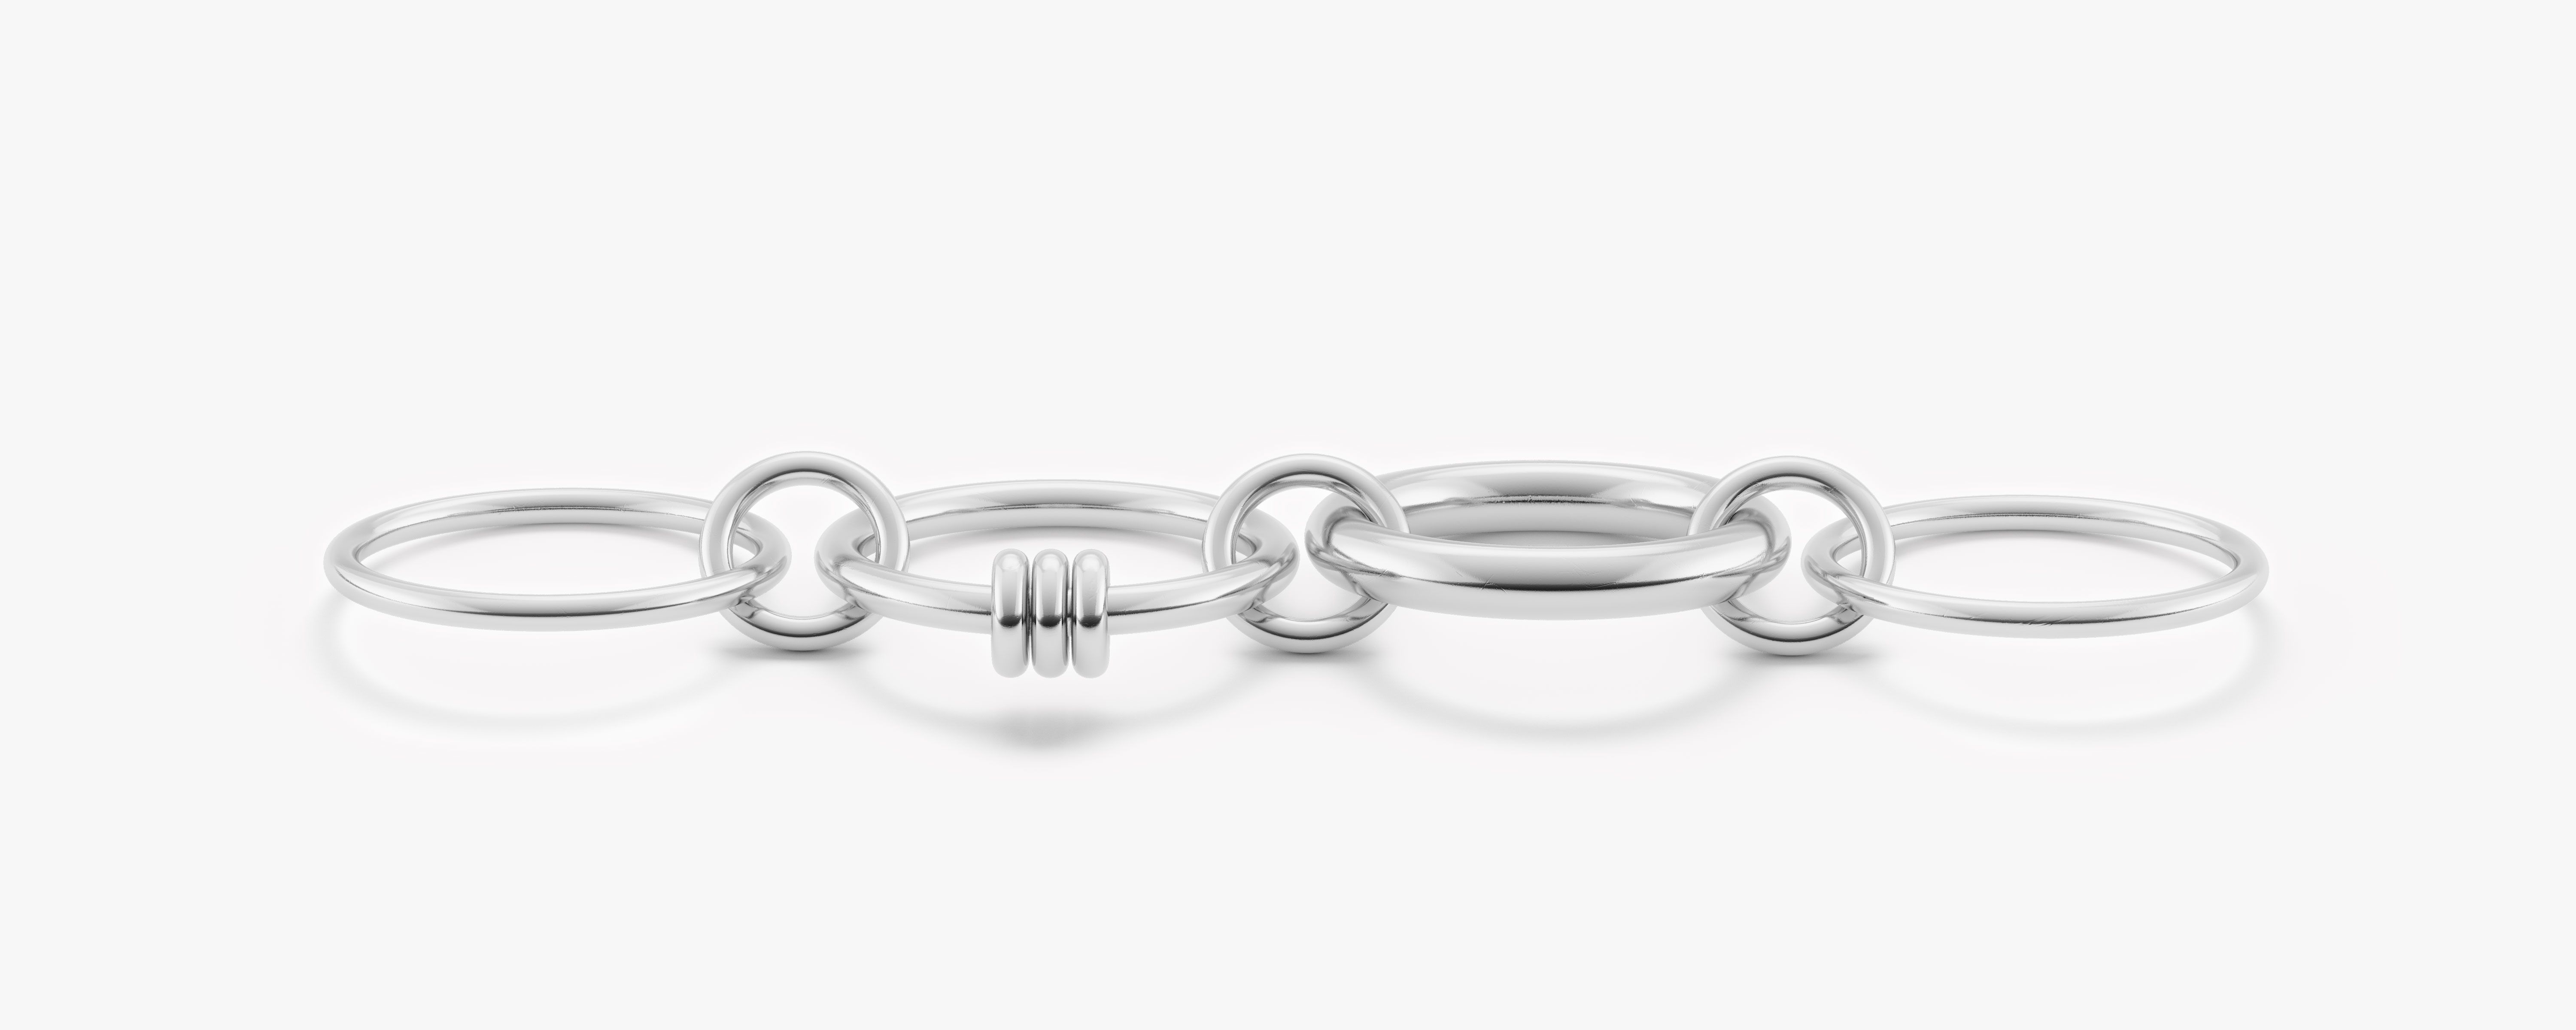 Spinelli Kilcollin rendering of the Aries Core Silver, four linked rings in silver spread out across a blank white background with light shadows beneath